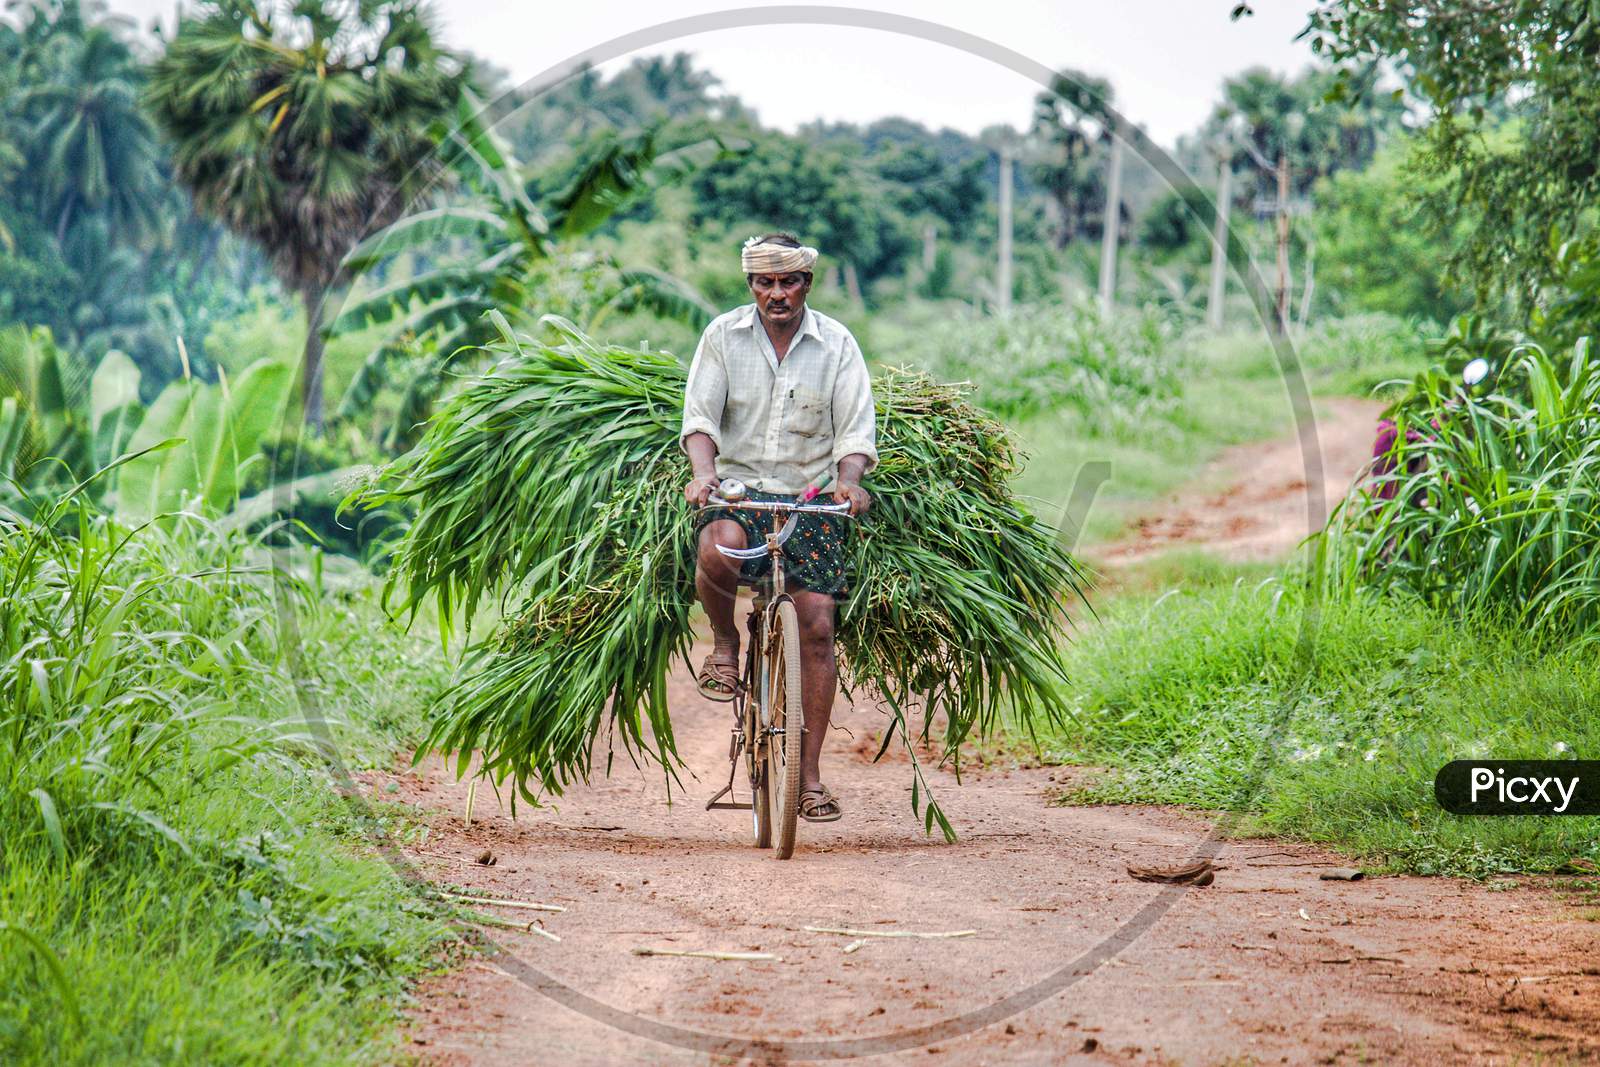 Farmer carrying green fodder to feed the cattle